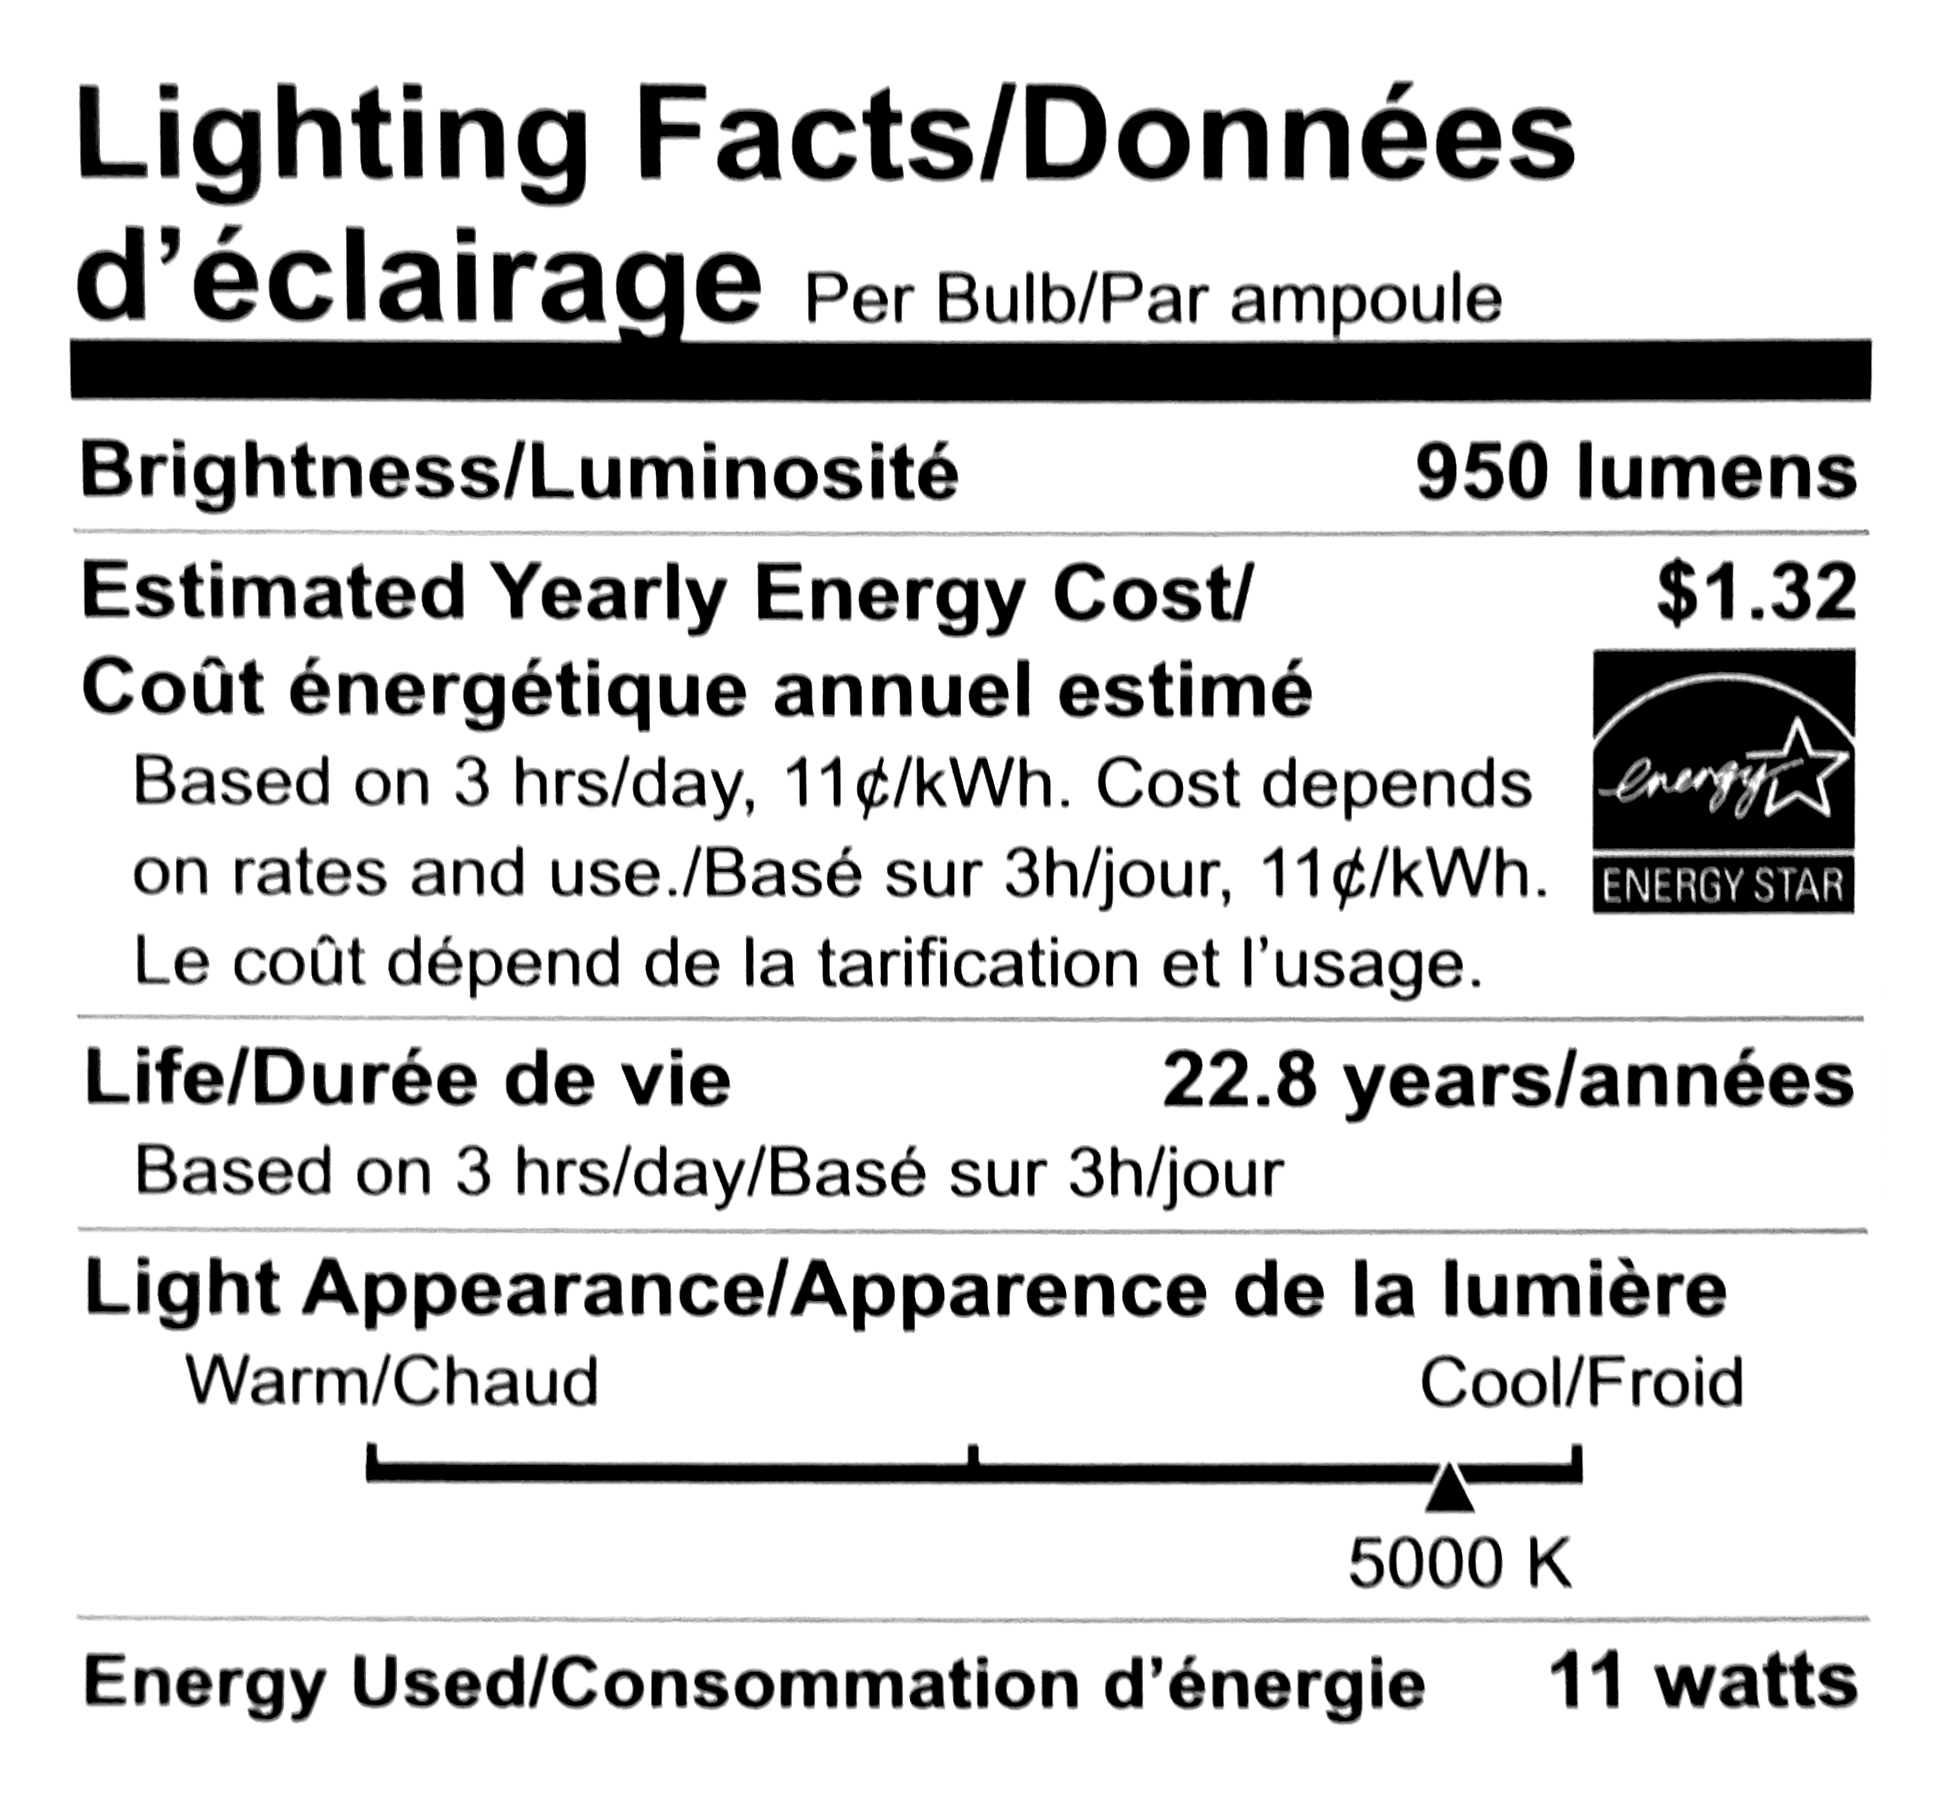 Photo shows a lighting facts label found on the side of a bulb package. It provides information specific to the bulb such as brightness, estimated annual energy cost, expected lifespan, etc.